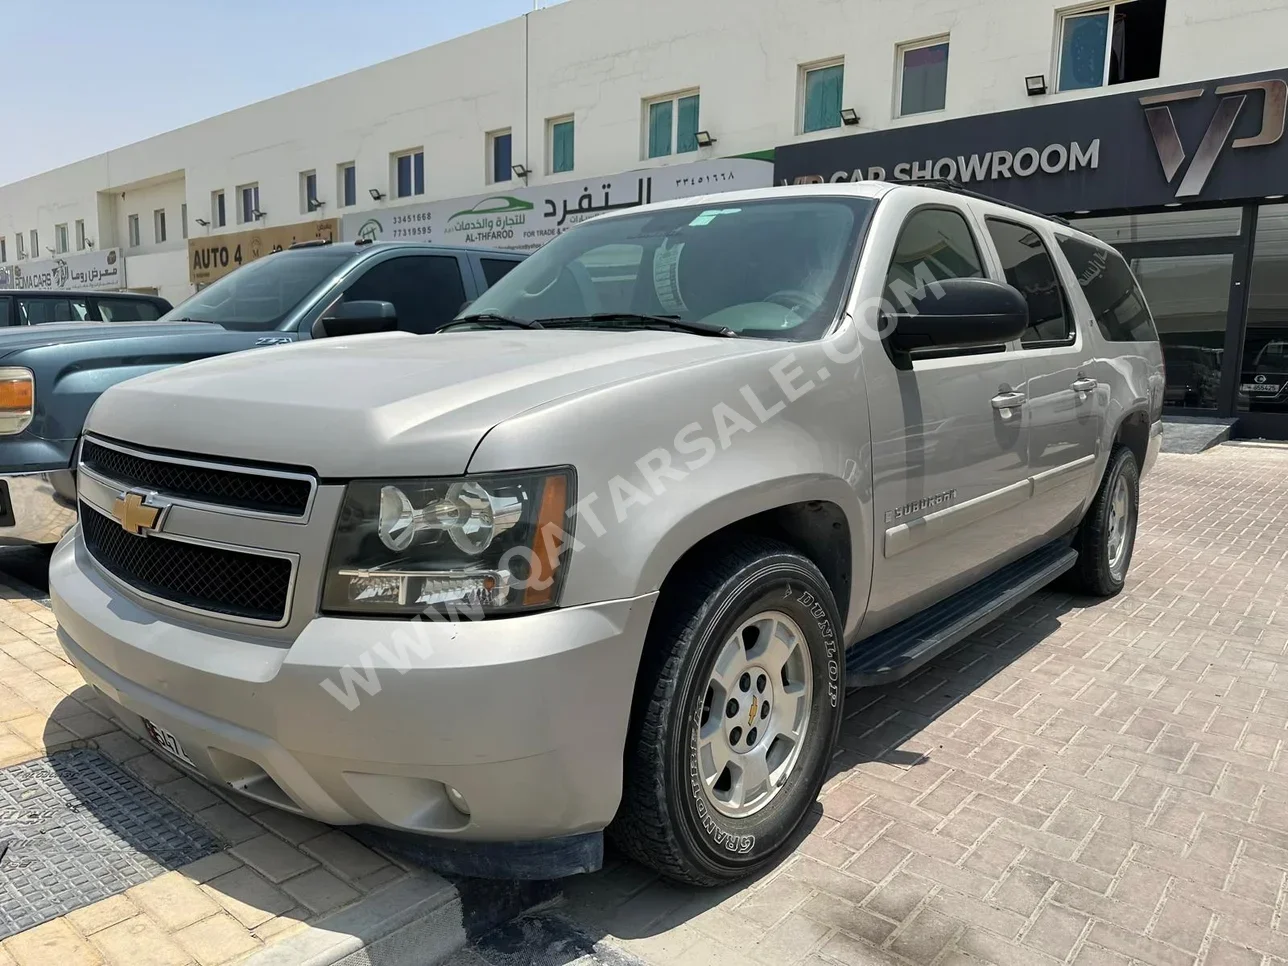 Chevrolet  Suburban  2007  Automatic  240,000 Km  8 Cylinder  Four Wheel Drive (4WD)  SUV  Gold